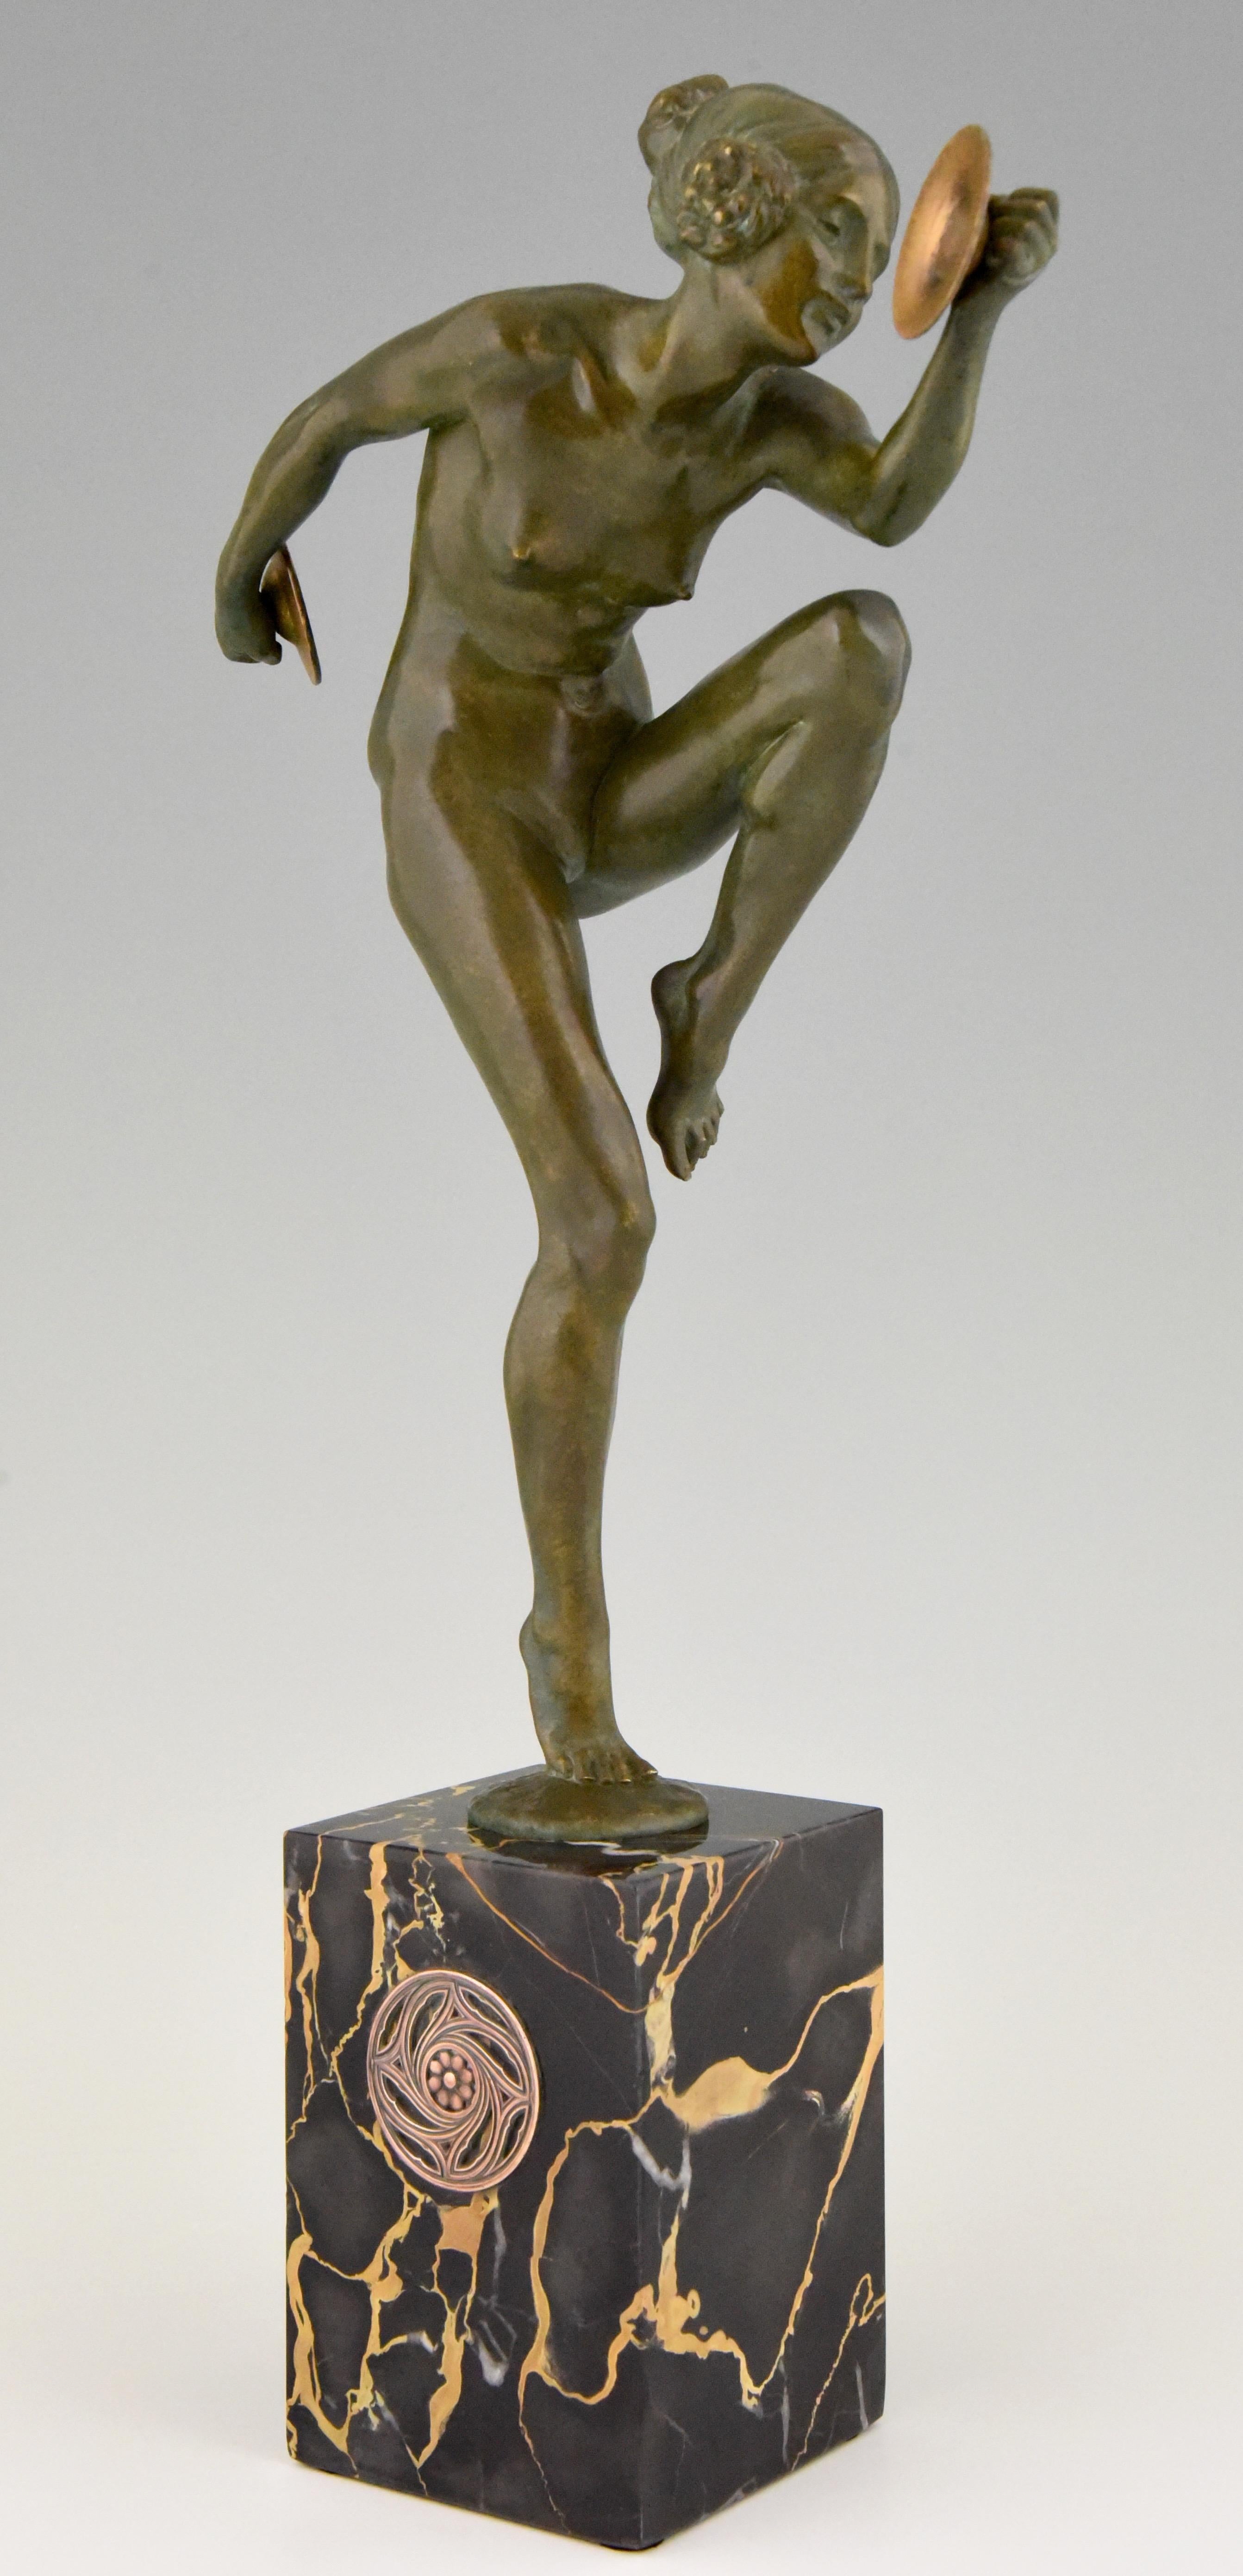 Beautiful Art Deco bronze sculpture of a dancing nude with cymbals. Signed by the French artist Lucien Alliot, on a marble base with bronze plaque. 

Artist/ Maker: Lucien Alliot
Signature/ Marks: L. Alliot
Style: Art Deco.
Date: